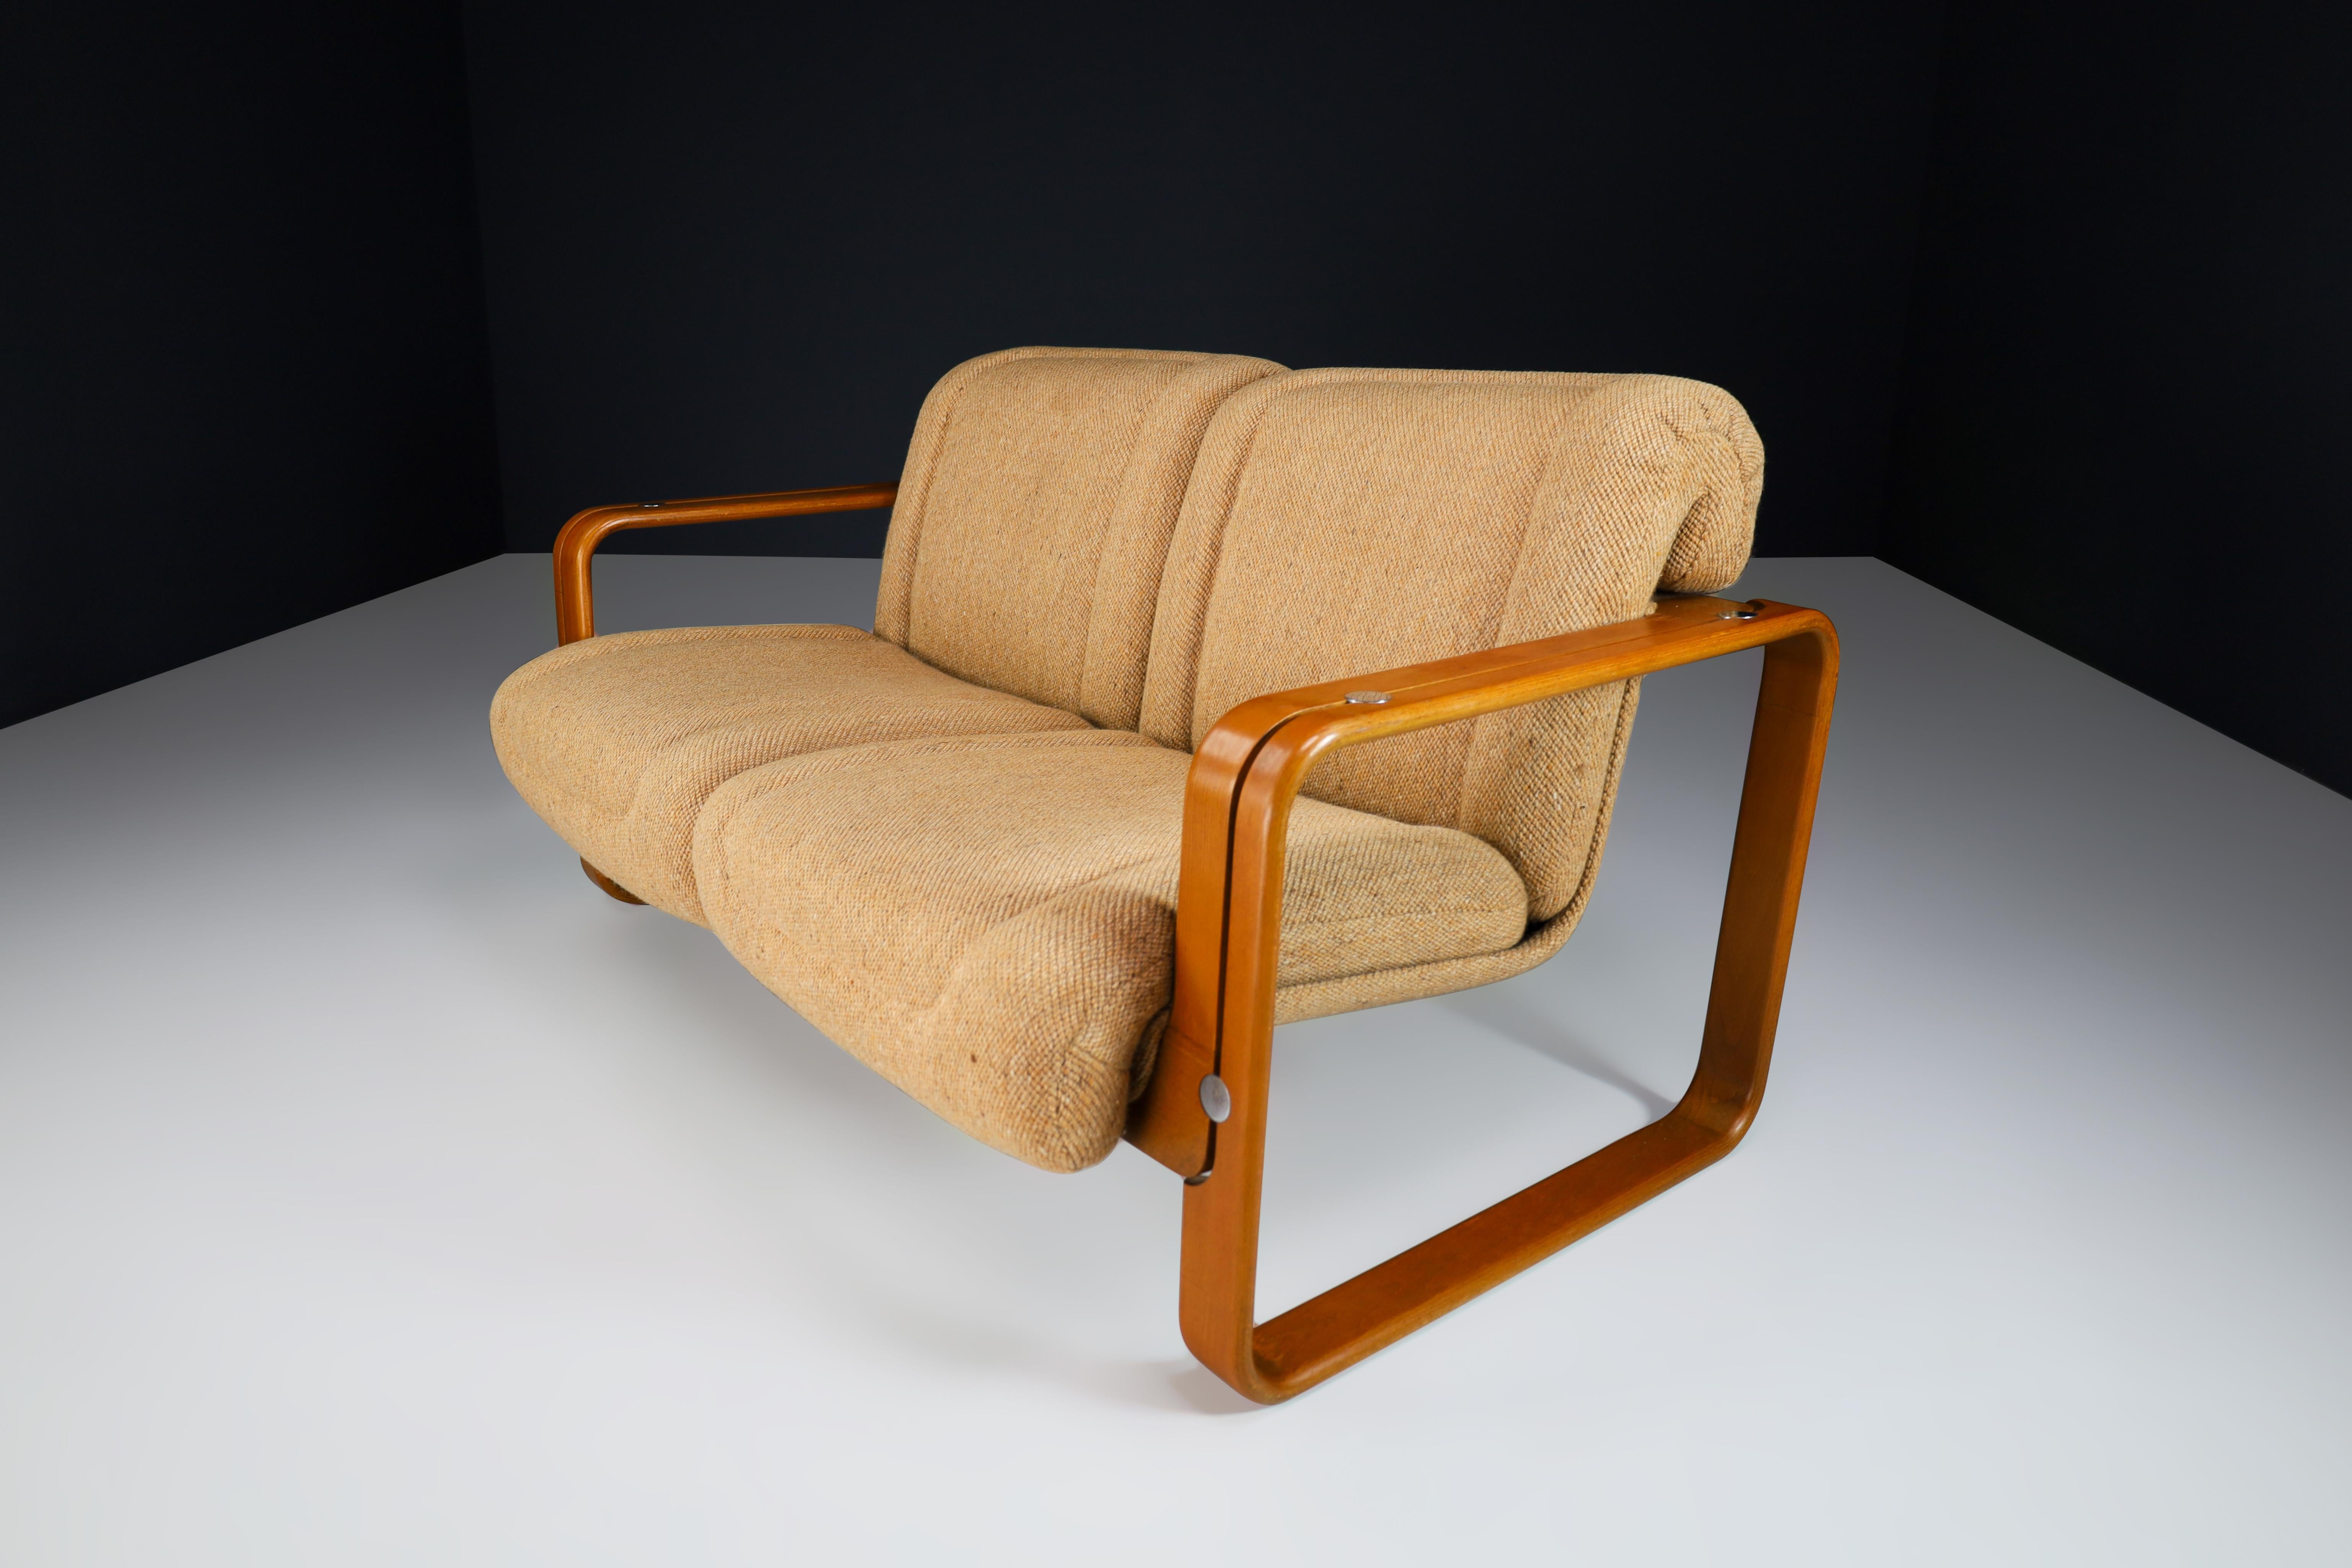 Jan Bočan Bentwood Two Seat Sofa in Original Jute Fabric 1960s

This two-seater sofa was designed by the award-winning architect Jan Bocan and possibly produced by Thonet or Ton. The sofa is in good original condition, and it has original upholstery